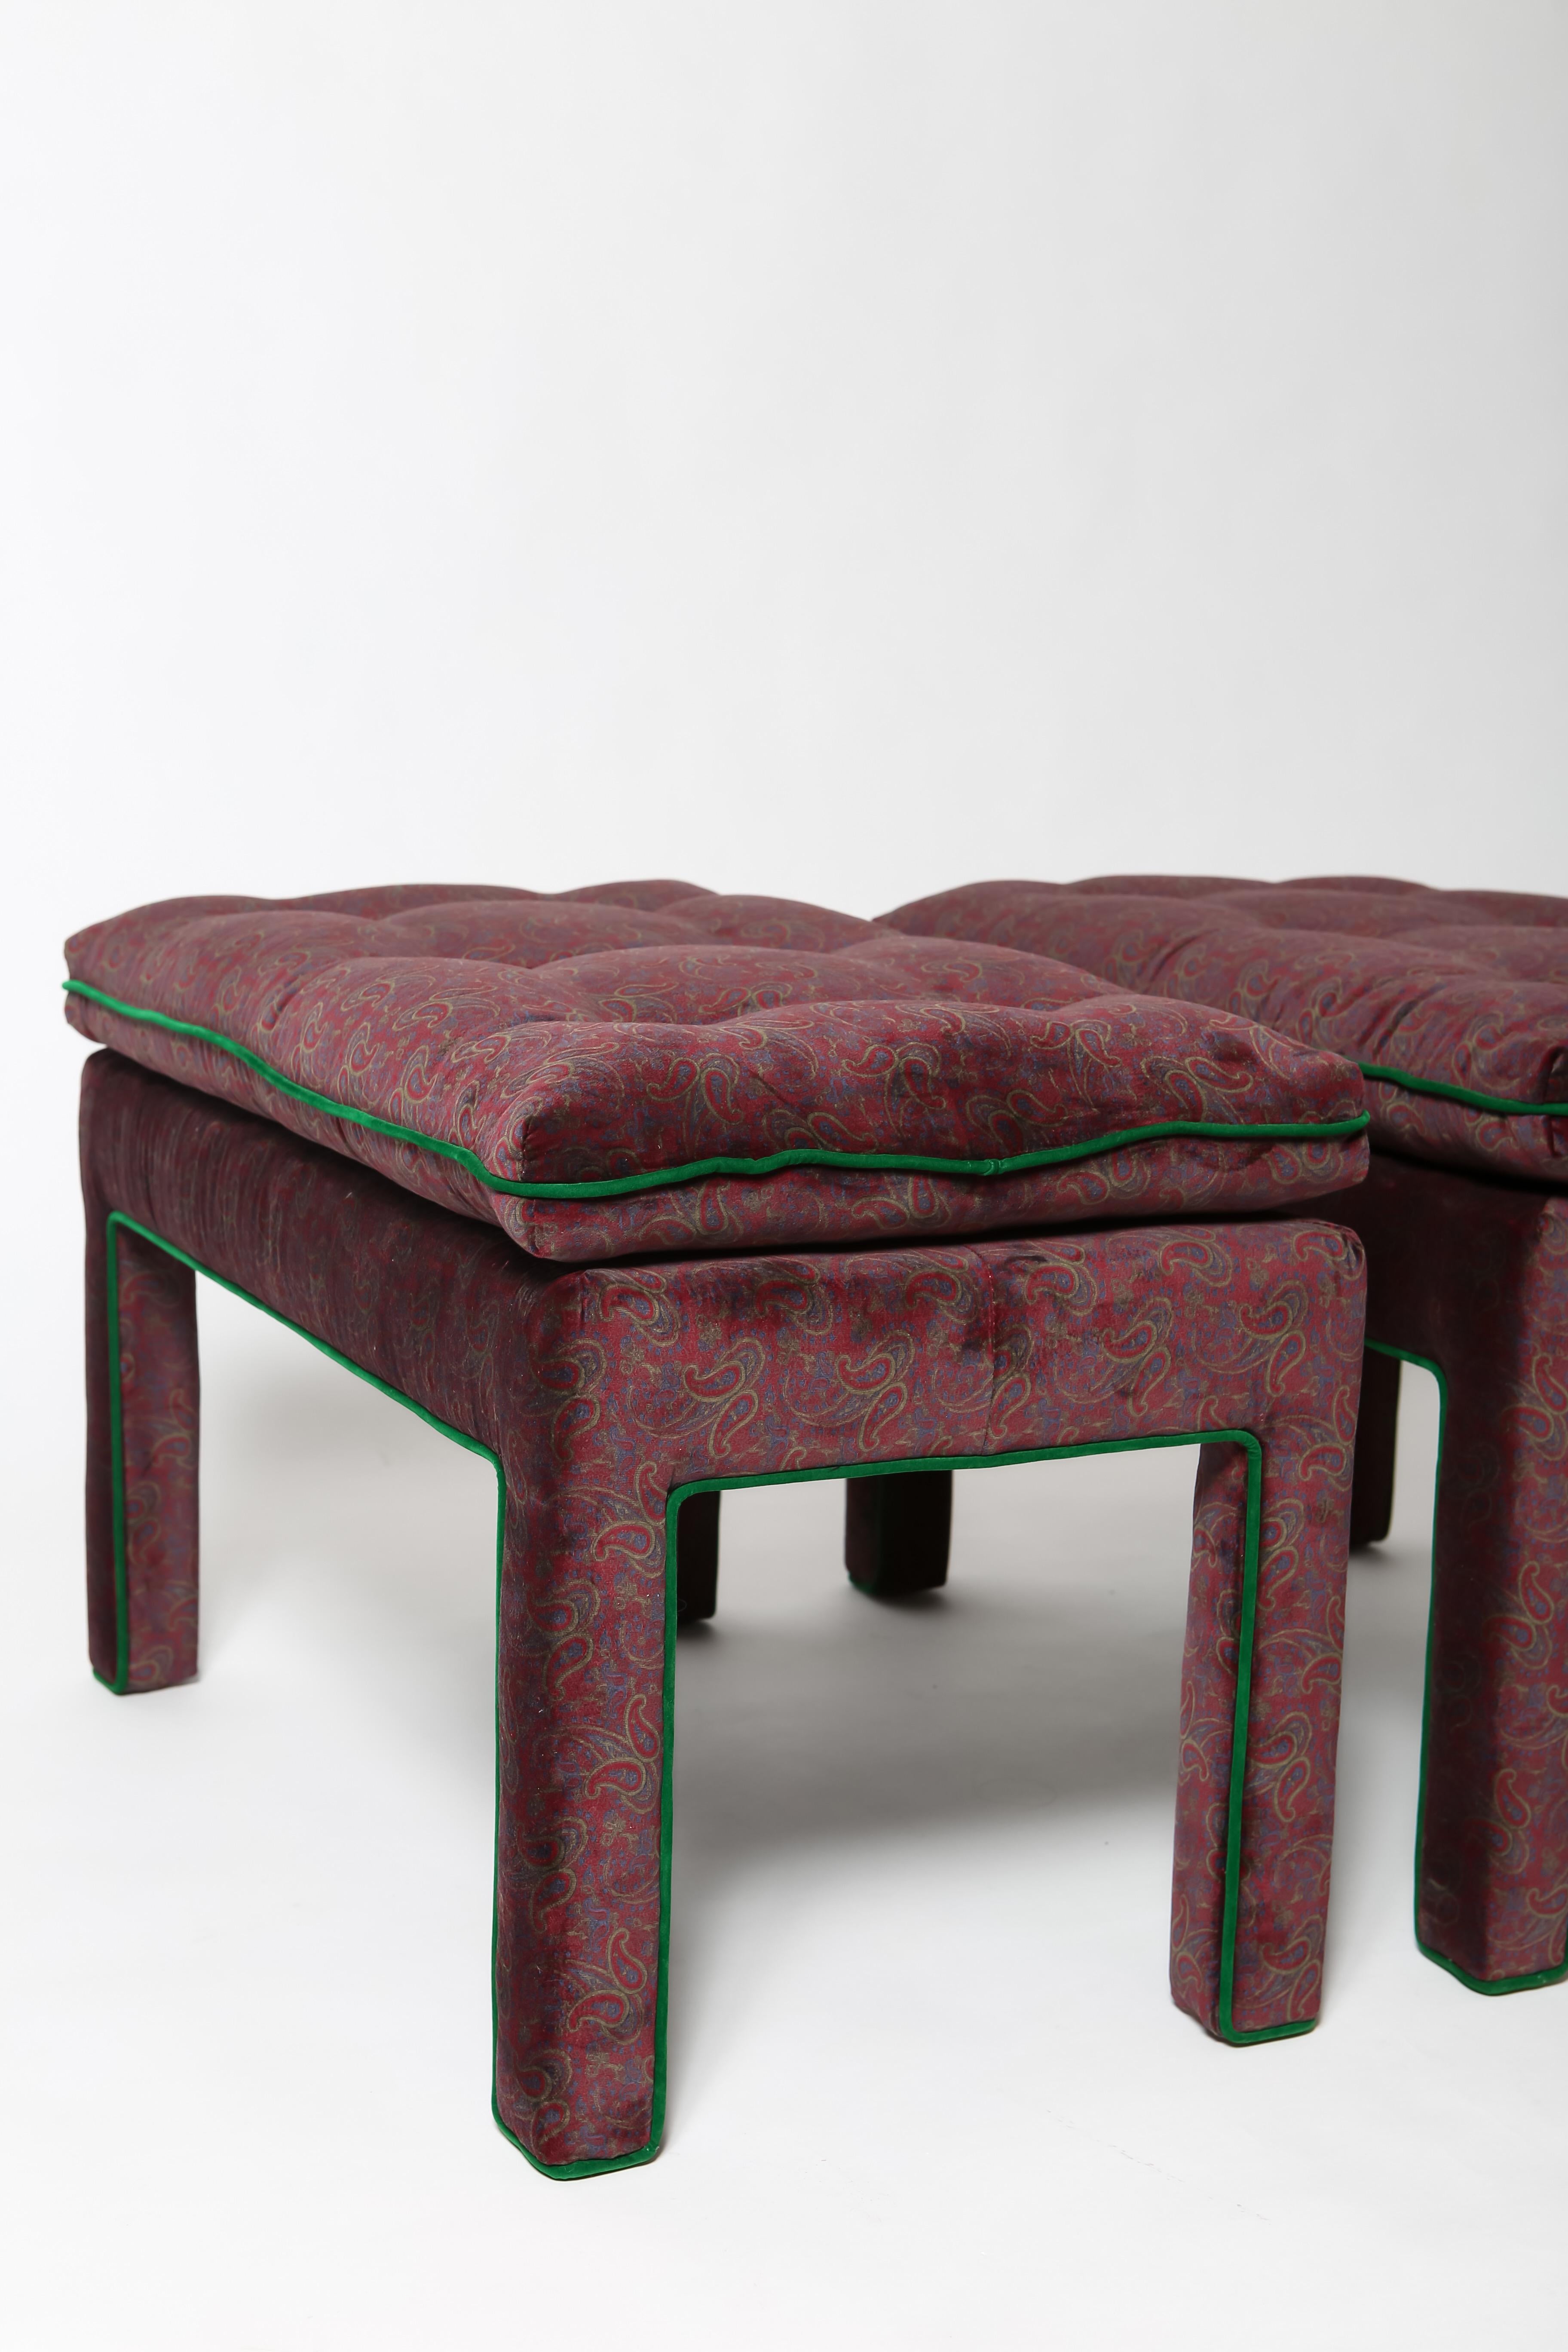 Fully-upholstered pair of parsons benches or ottomans. Use in dining, entry or at foot of bed- these are really fun. Reupholstered in deadstock vintage cotton velvet with paisley print and accented with a grass green velvet welt. Button tufted fixed